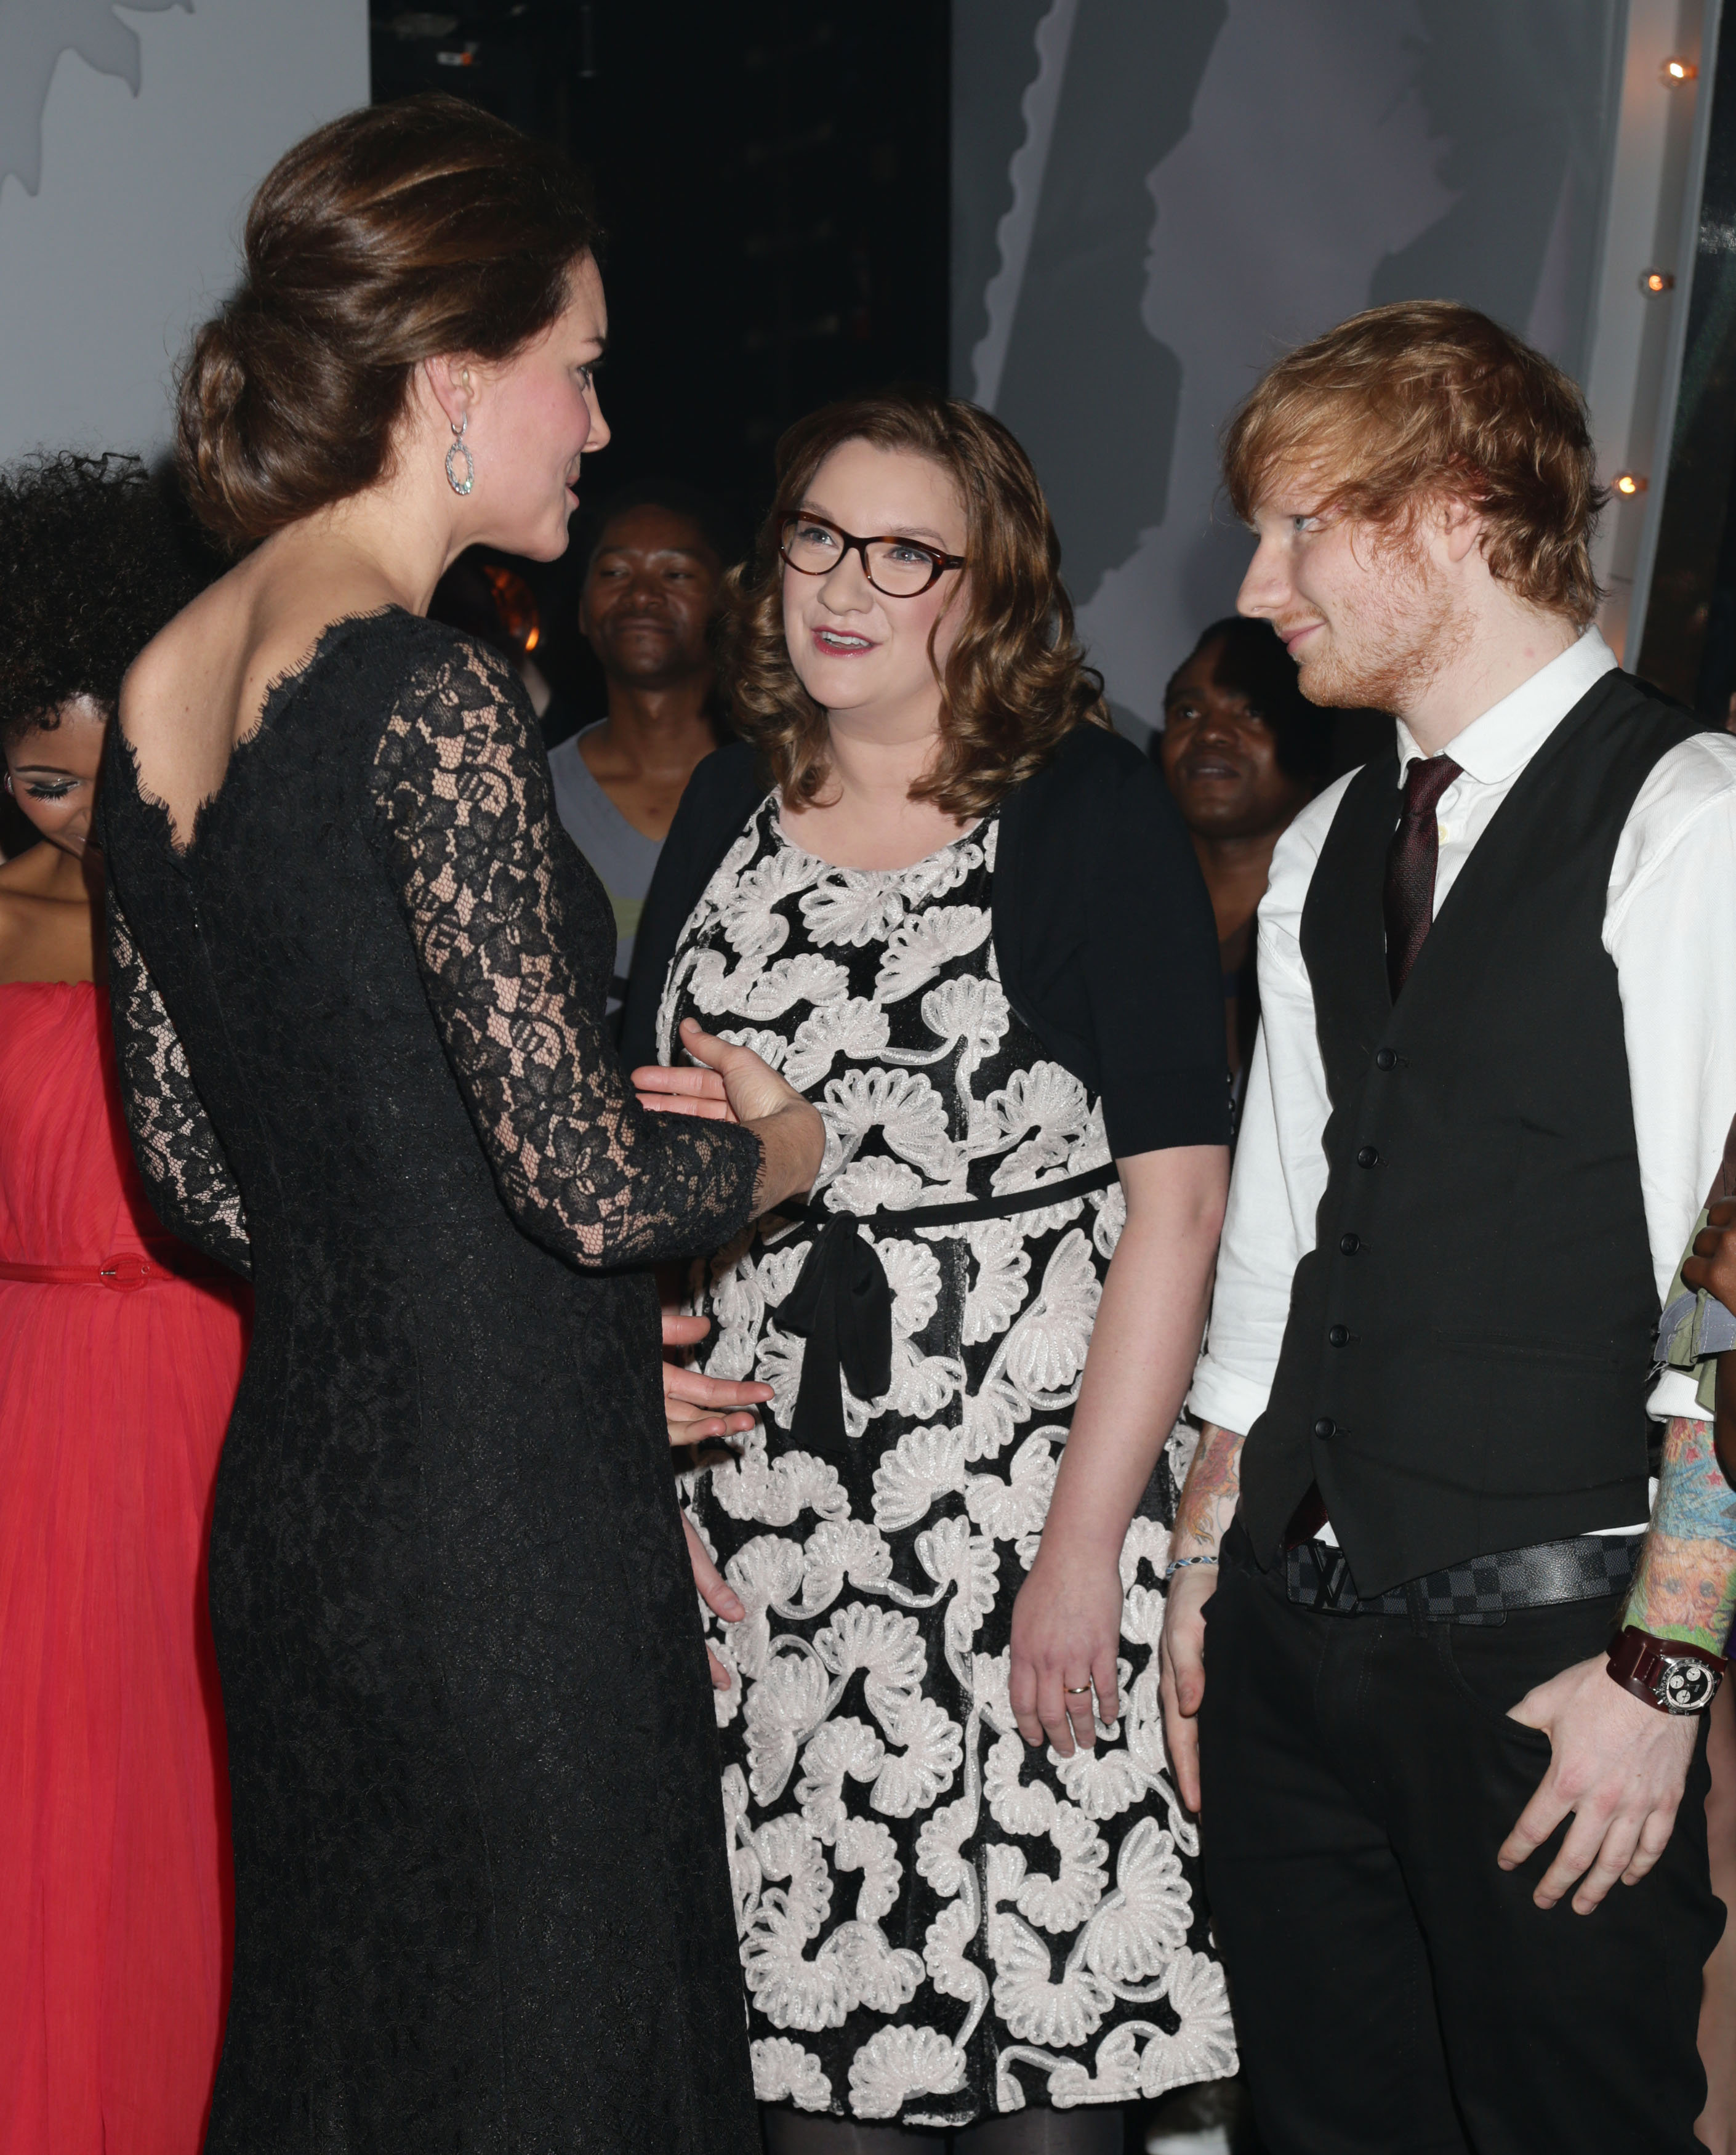 Catherine, Duchess of Cambridge meets Sarah Millican and Ed Sheeran at the end of The Royal Variety Performance at the London Palladium on 13 November 2014 in London, England.